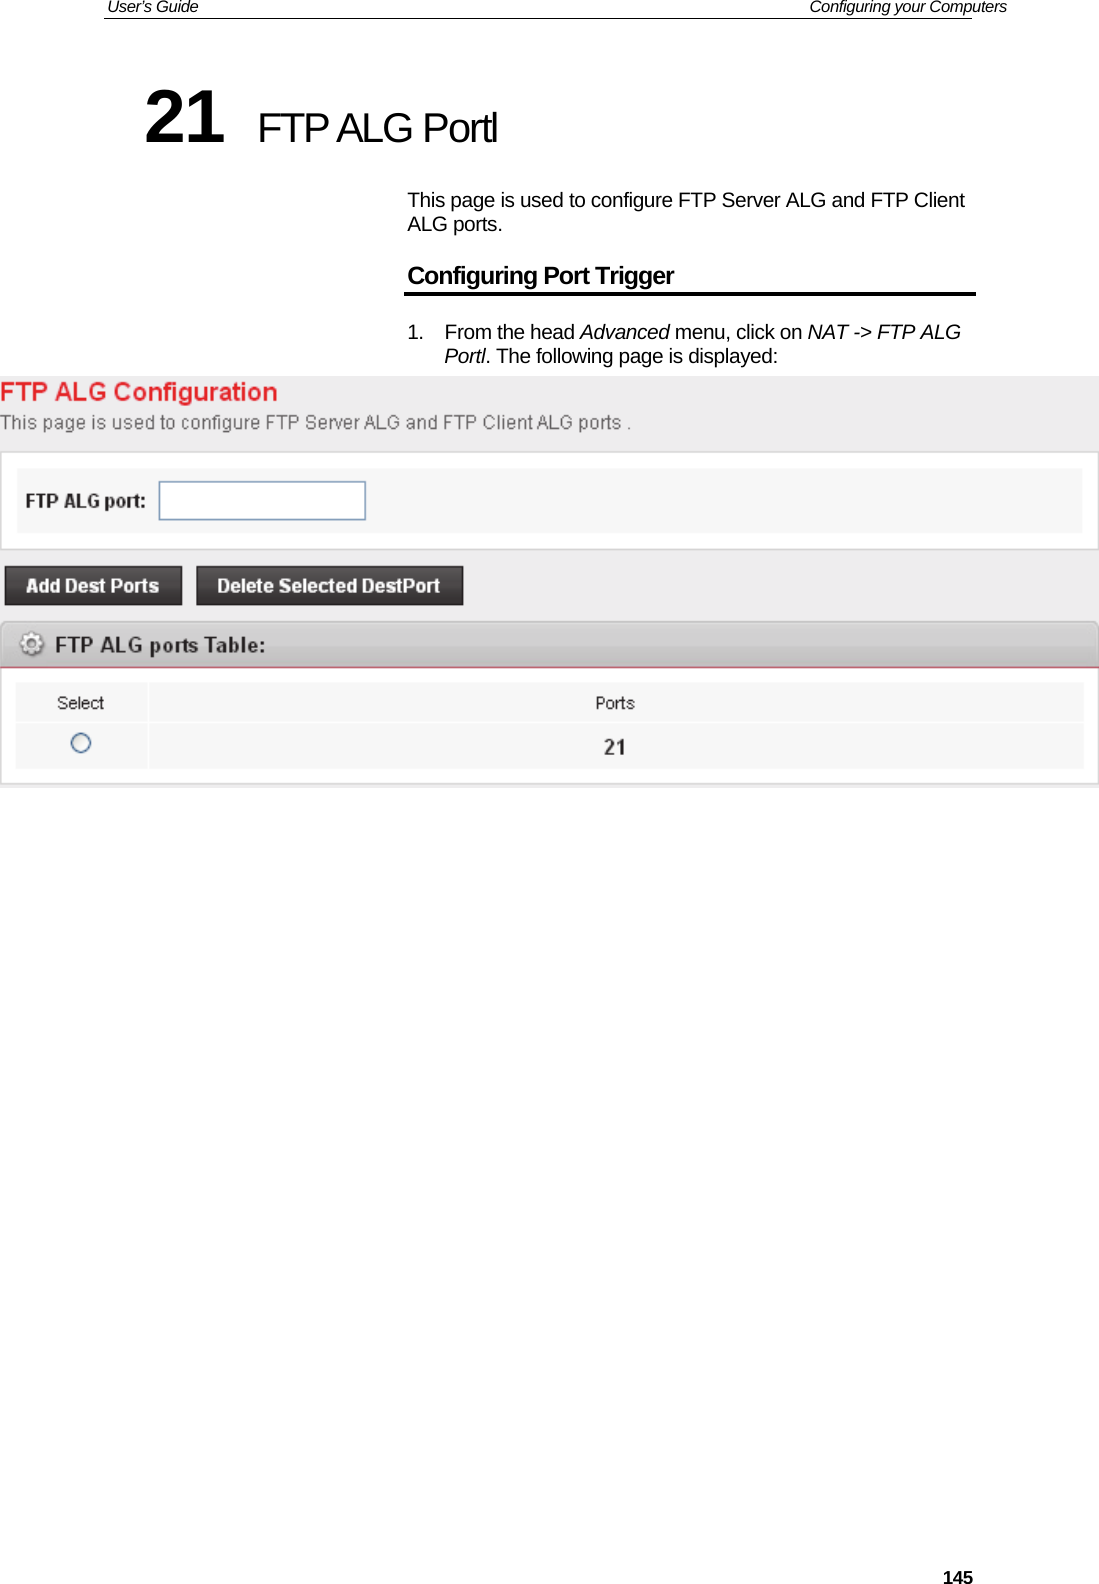 User’s Guide   Configuring your Computers  14521  FTP ALG Portl This page is used to configure FTP Server ALG and FTP Client ALG ports. Configuring Port Trigger 1. From the head Advanced menu, click on NAT -&gt; FTP ALG Portl. The following page is displayed:                     